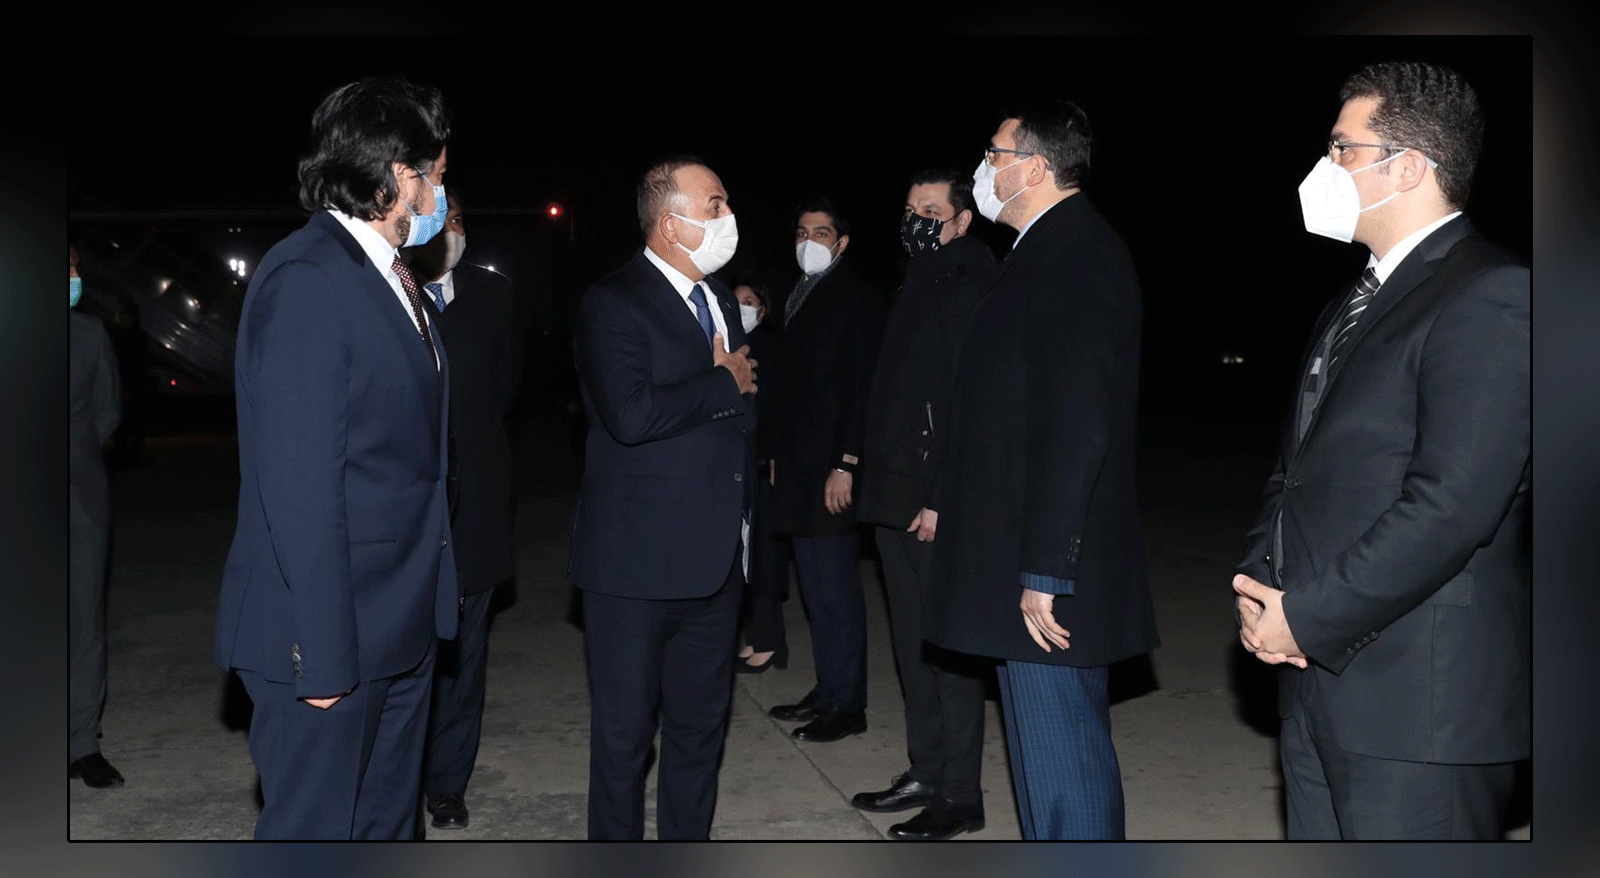 Turkish Foreign Minister arrived in Pakistan with a large delegation